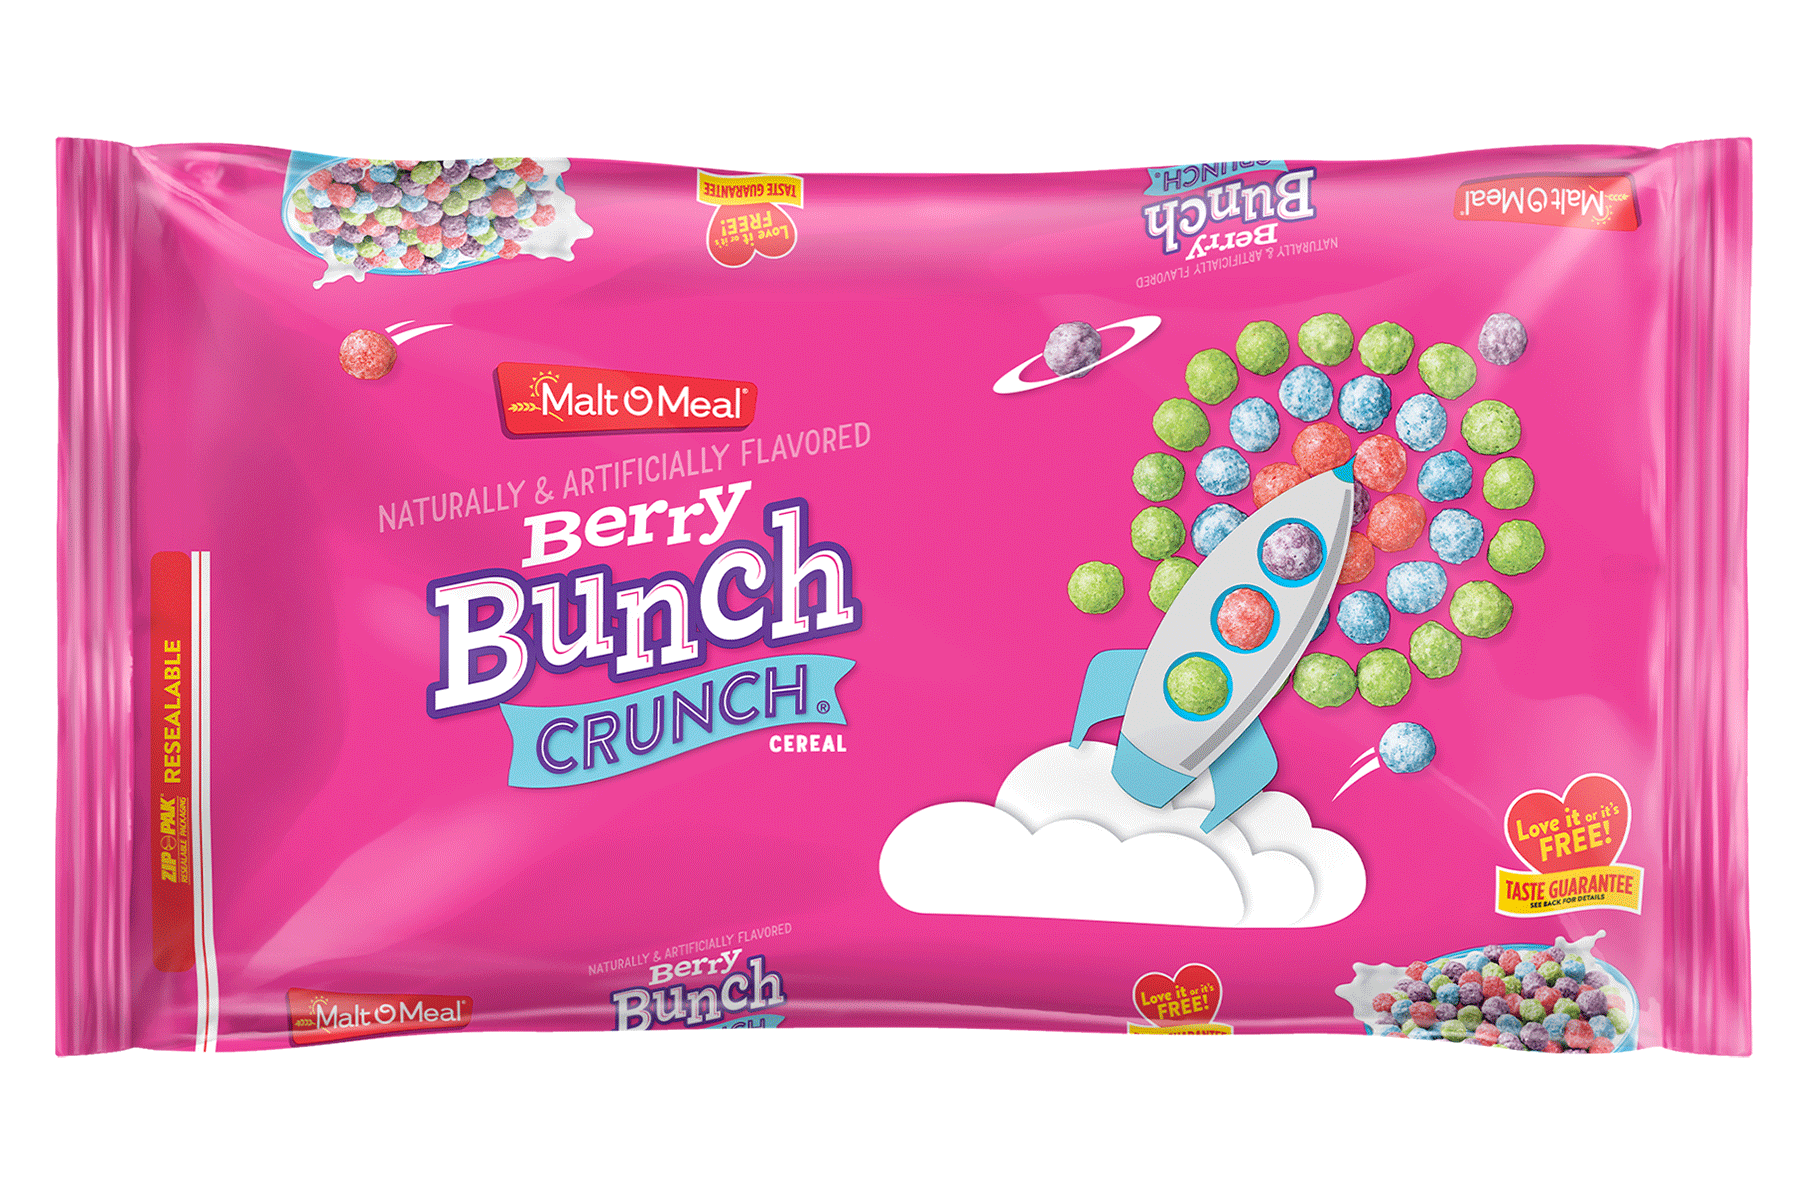 Berry Bunch Crunch Malt-O-Meal cereal